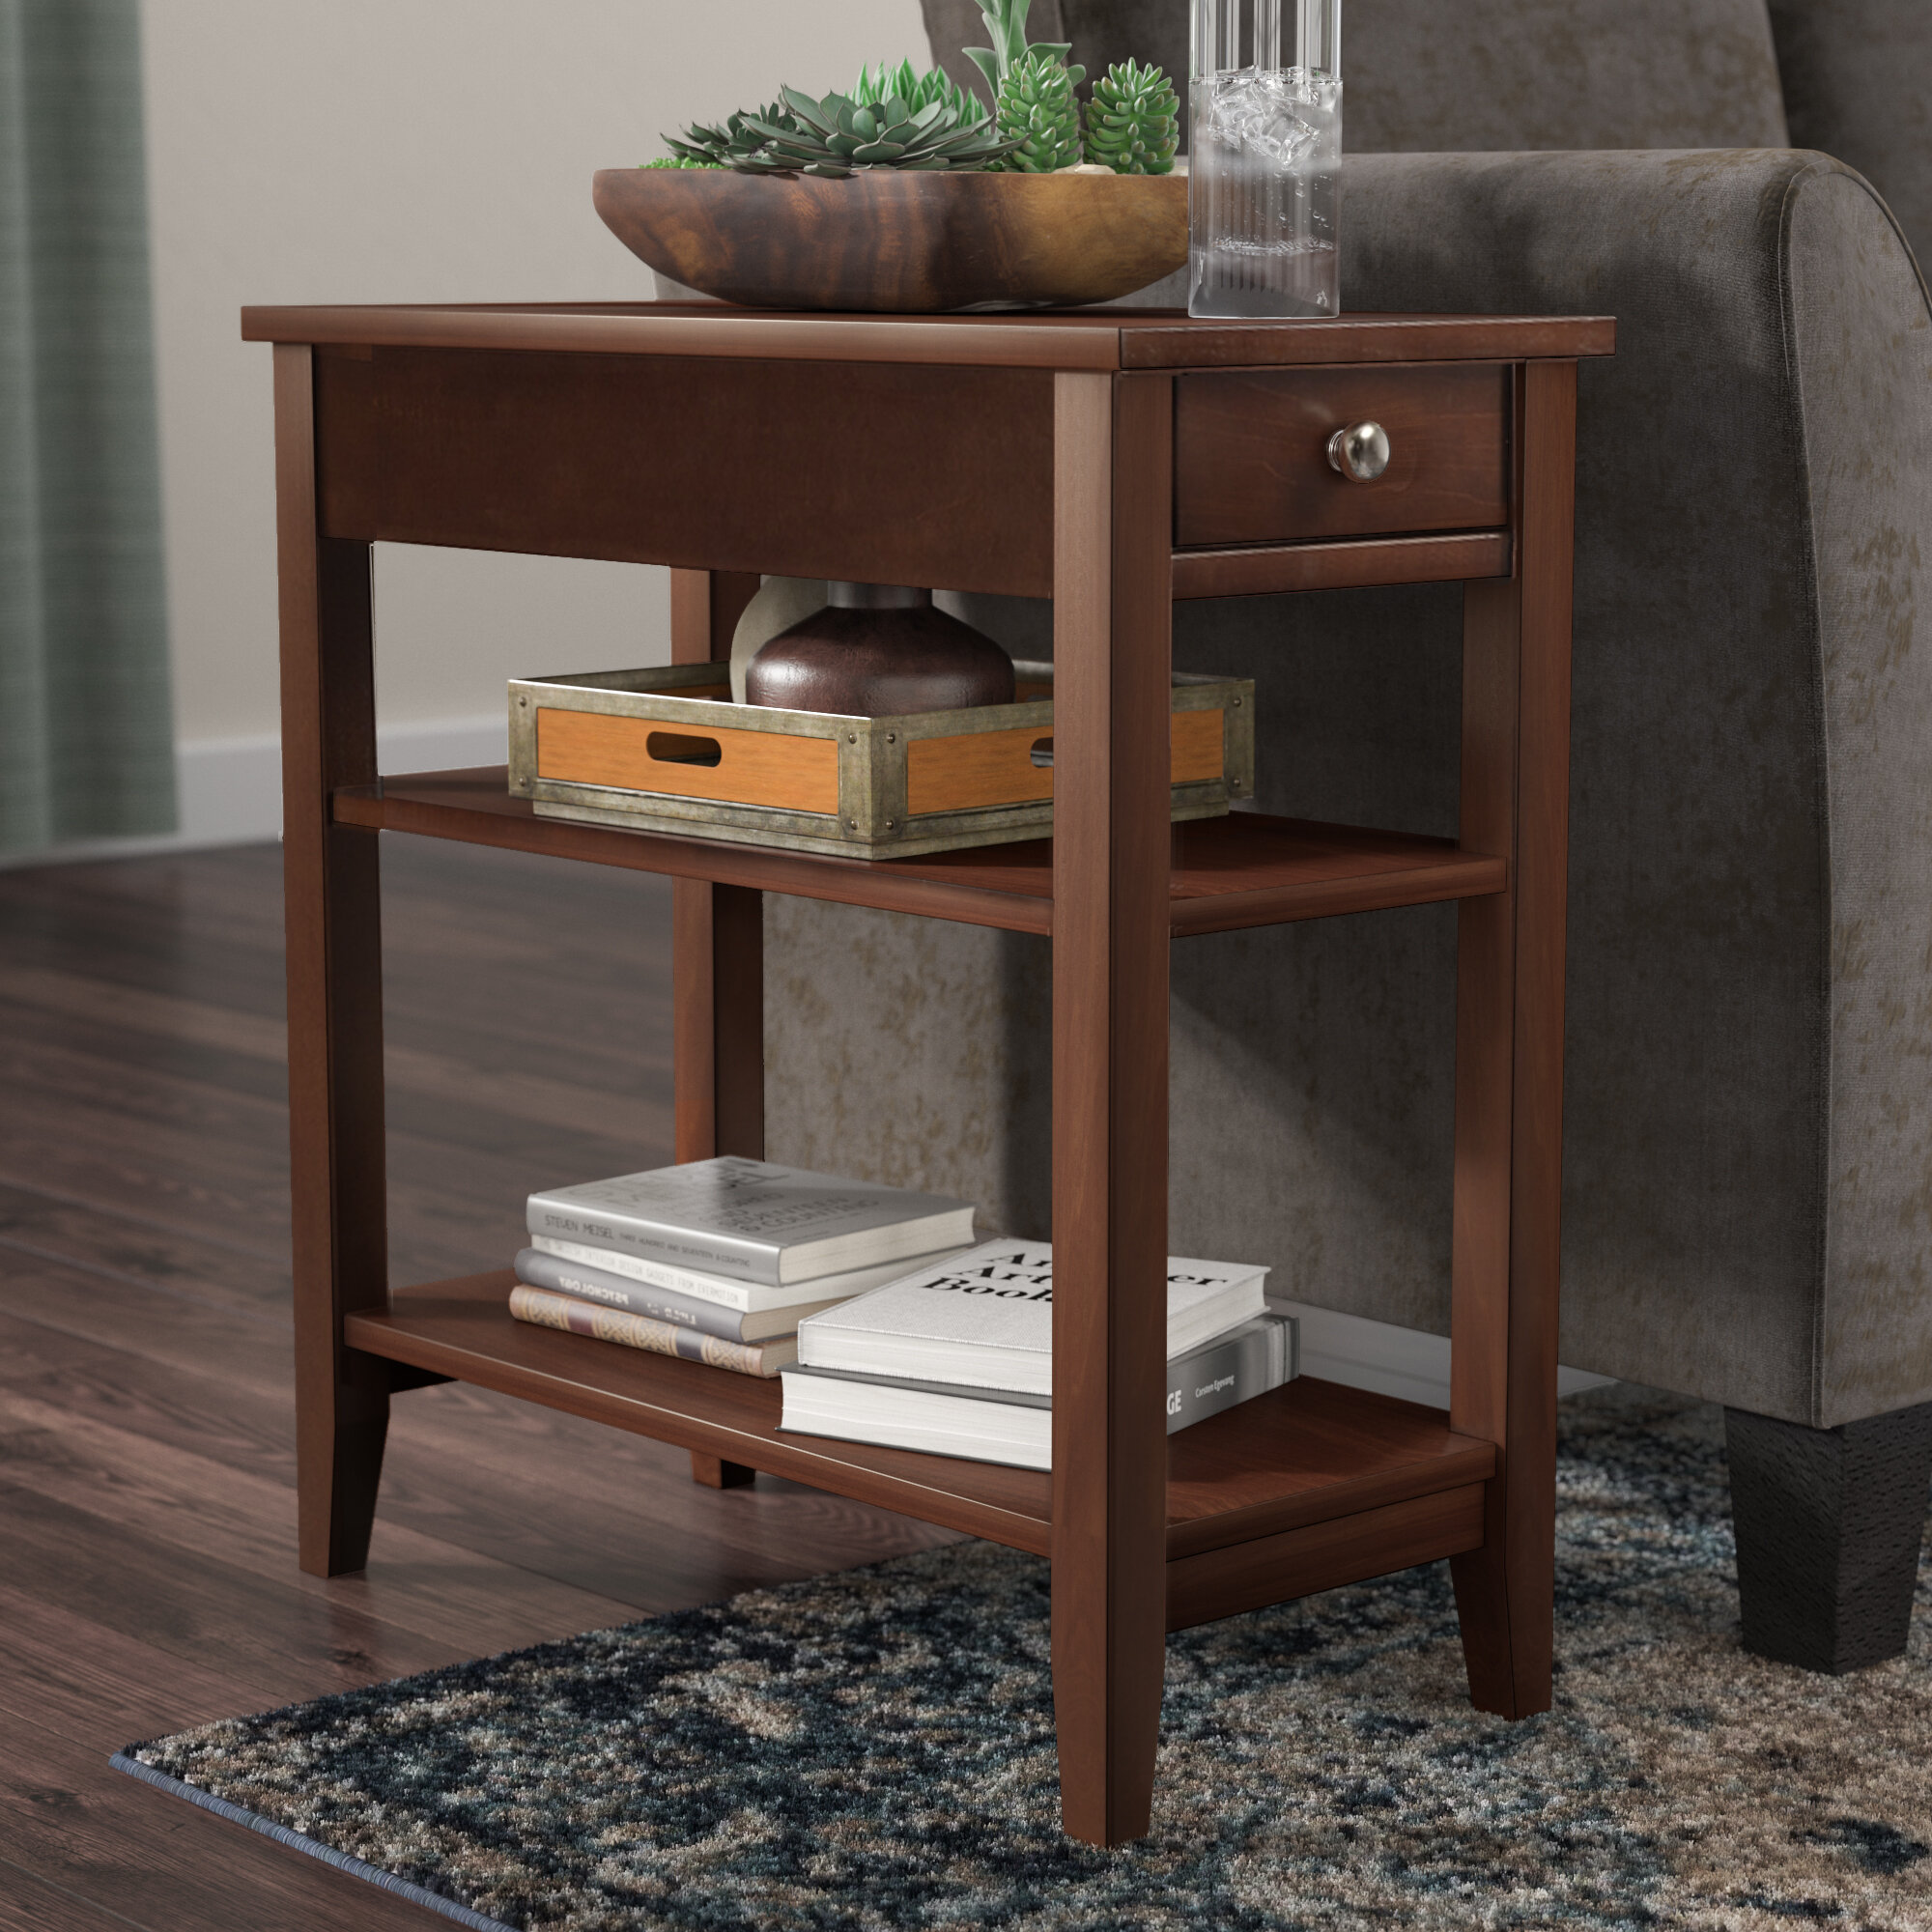 Elegant pictures of end tables Three Posts Inman End Table With Storage Reviews Wayfair Ca